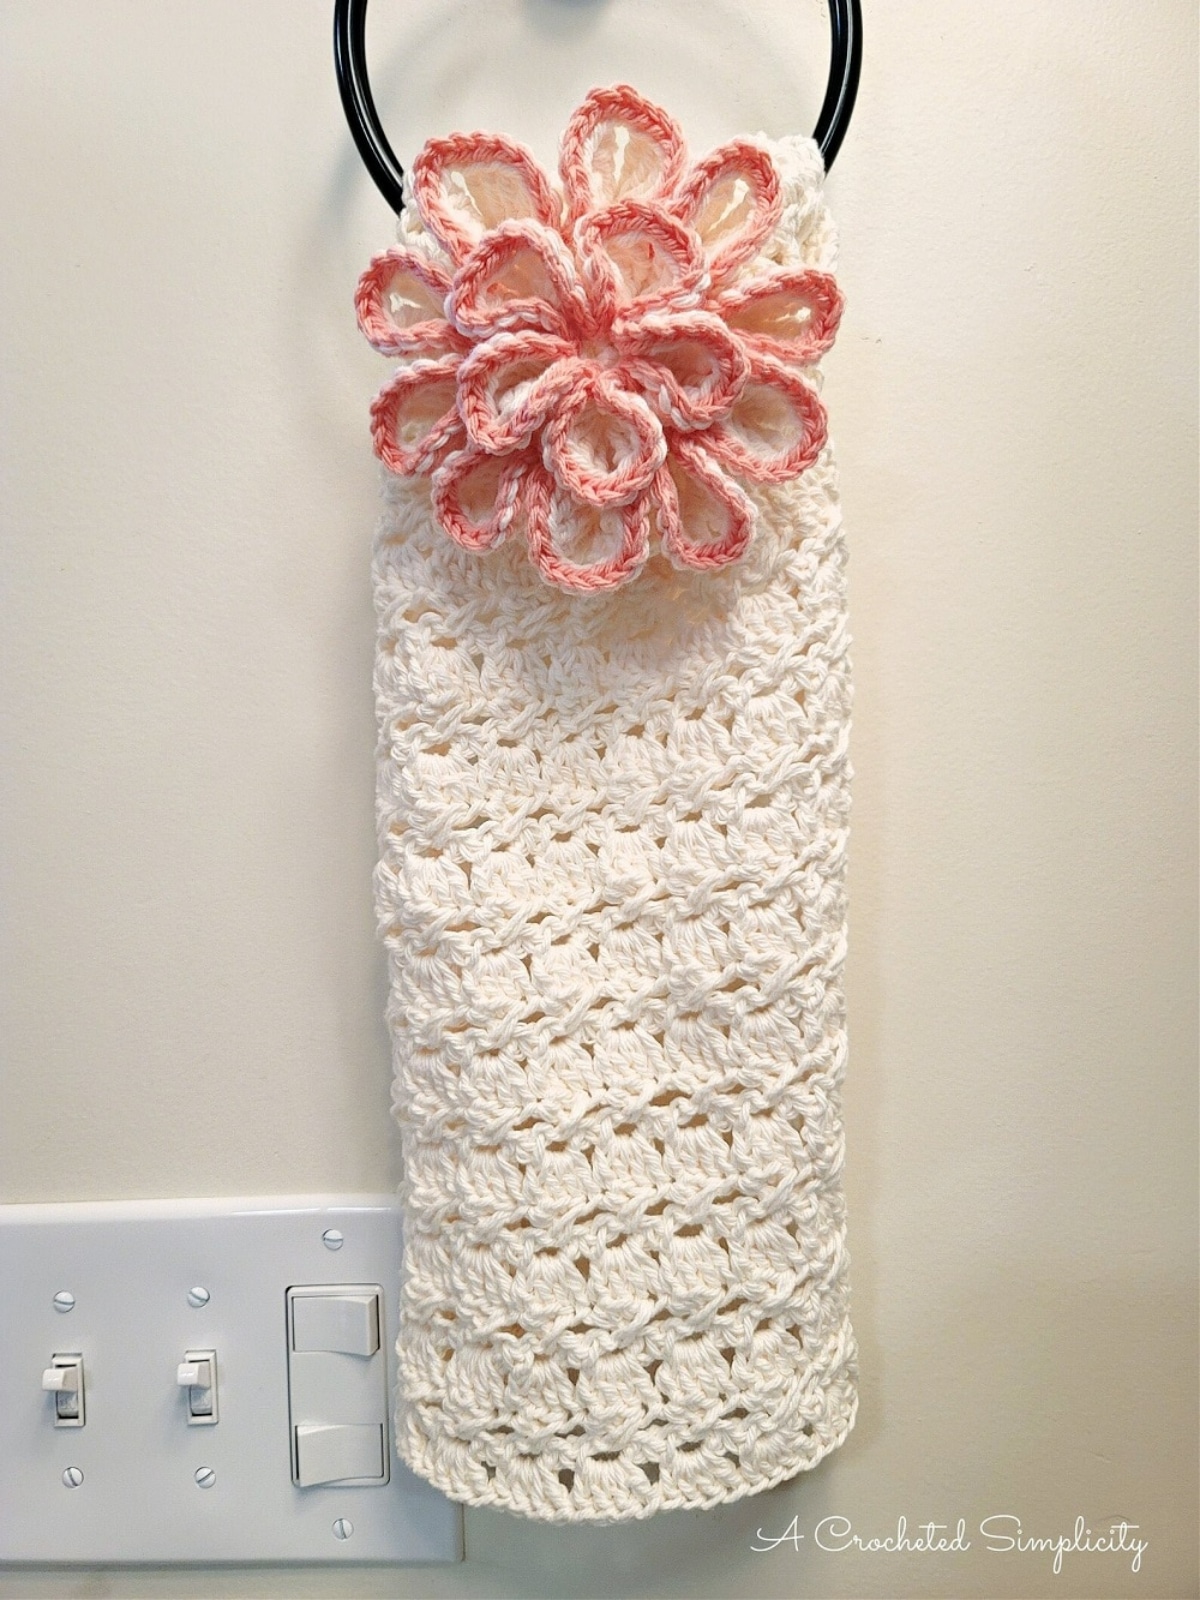 A white crochet hand towel with a large 3-D pink flower at the top folded over a towel hoop.